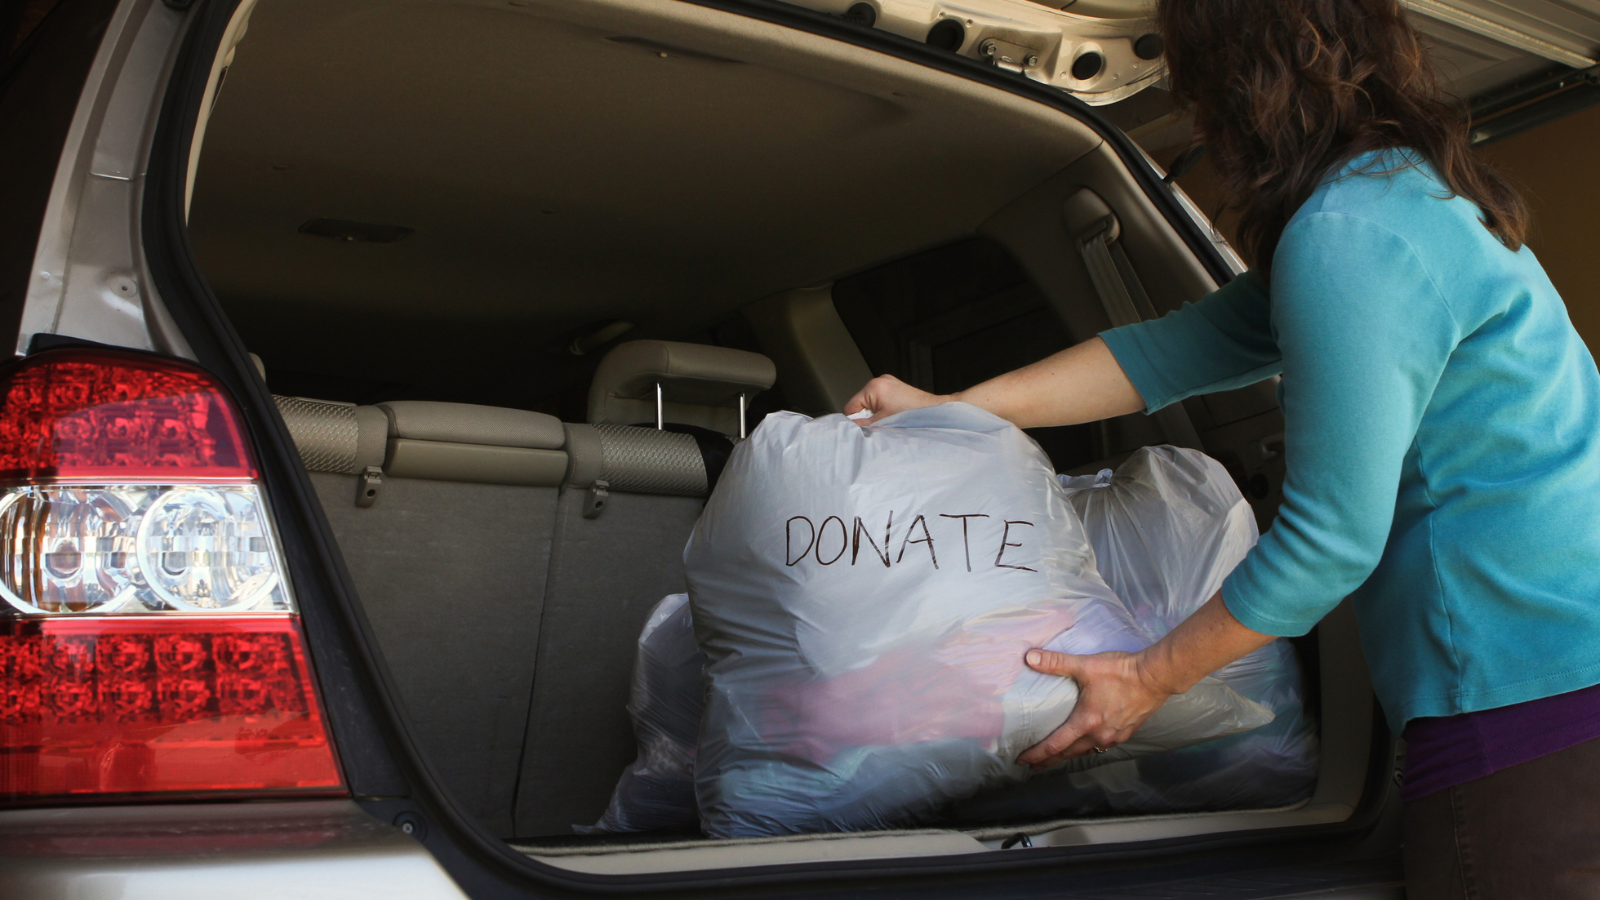 A woman placing a donation bag in her trunk.